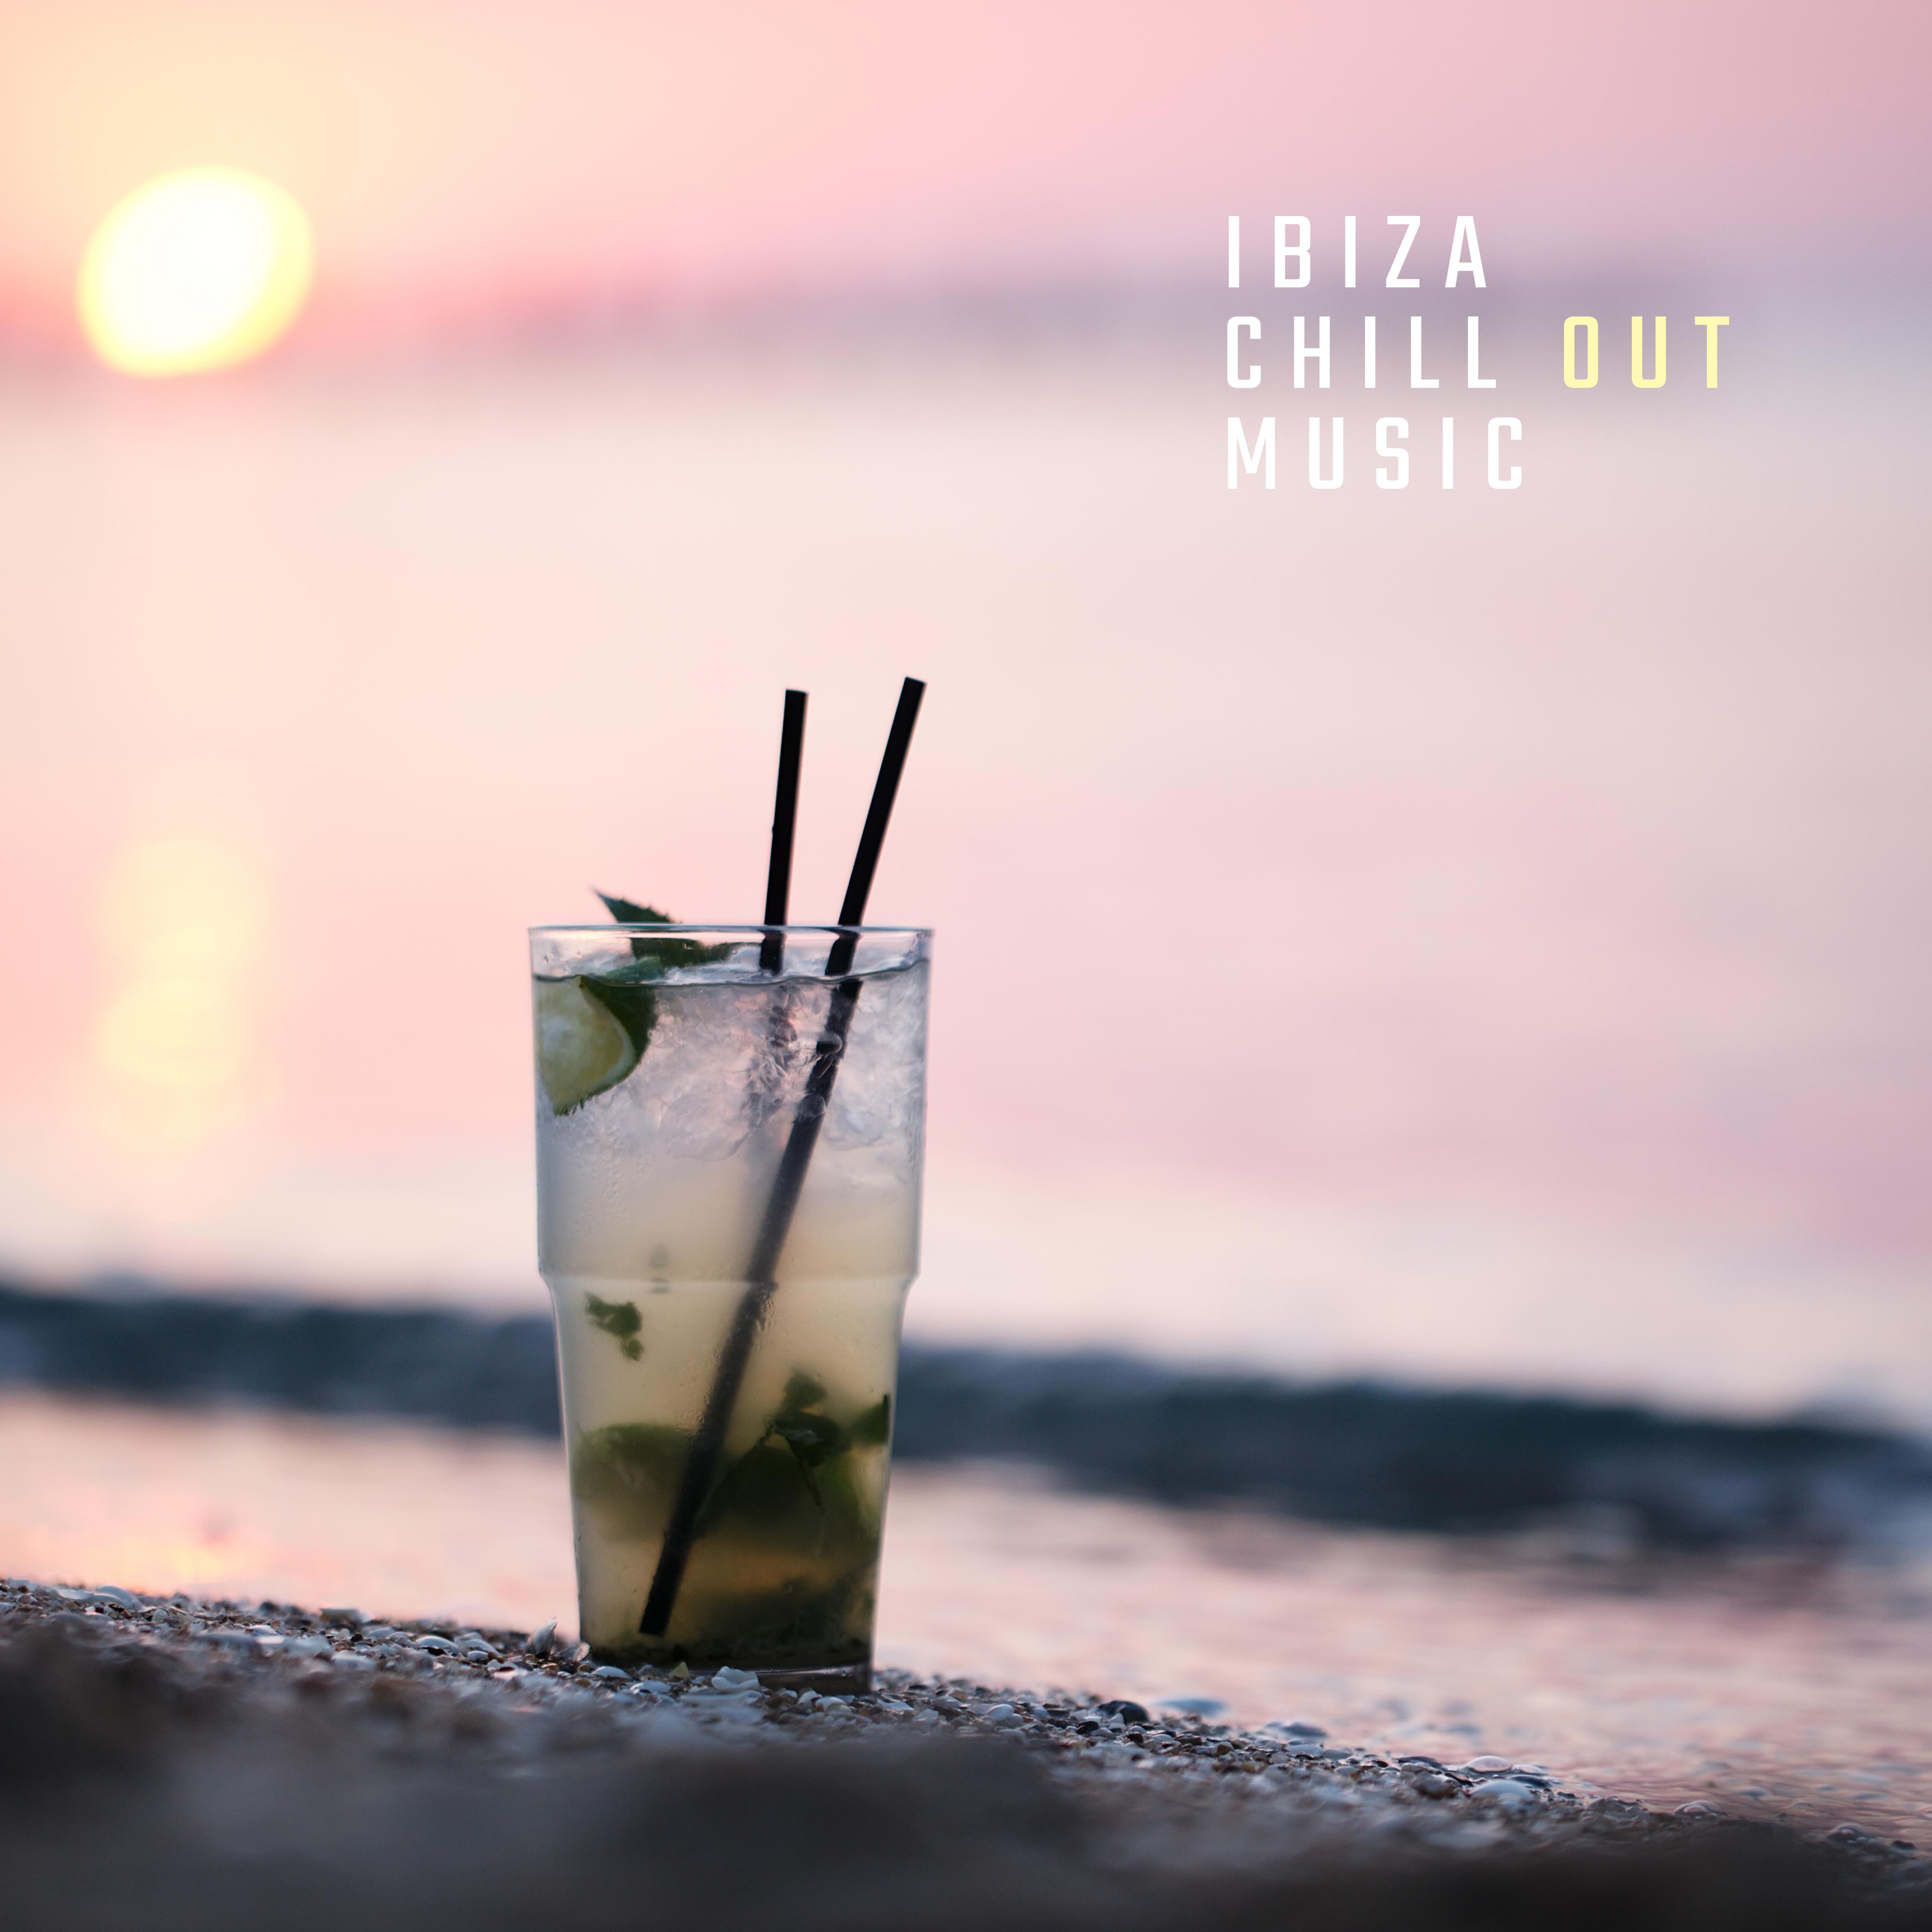 Ibiza Chill Out Music: Holiday Rhythms straight from Ibiza, Perfect for Holidays and Rest, Relaxation on the Beach, Trip to the Balearic Islands, for a Party, to a Beach Apartment or Lounging